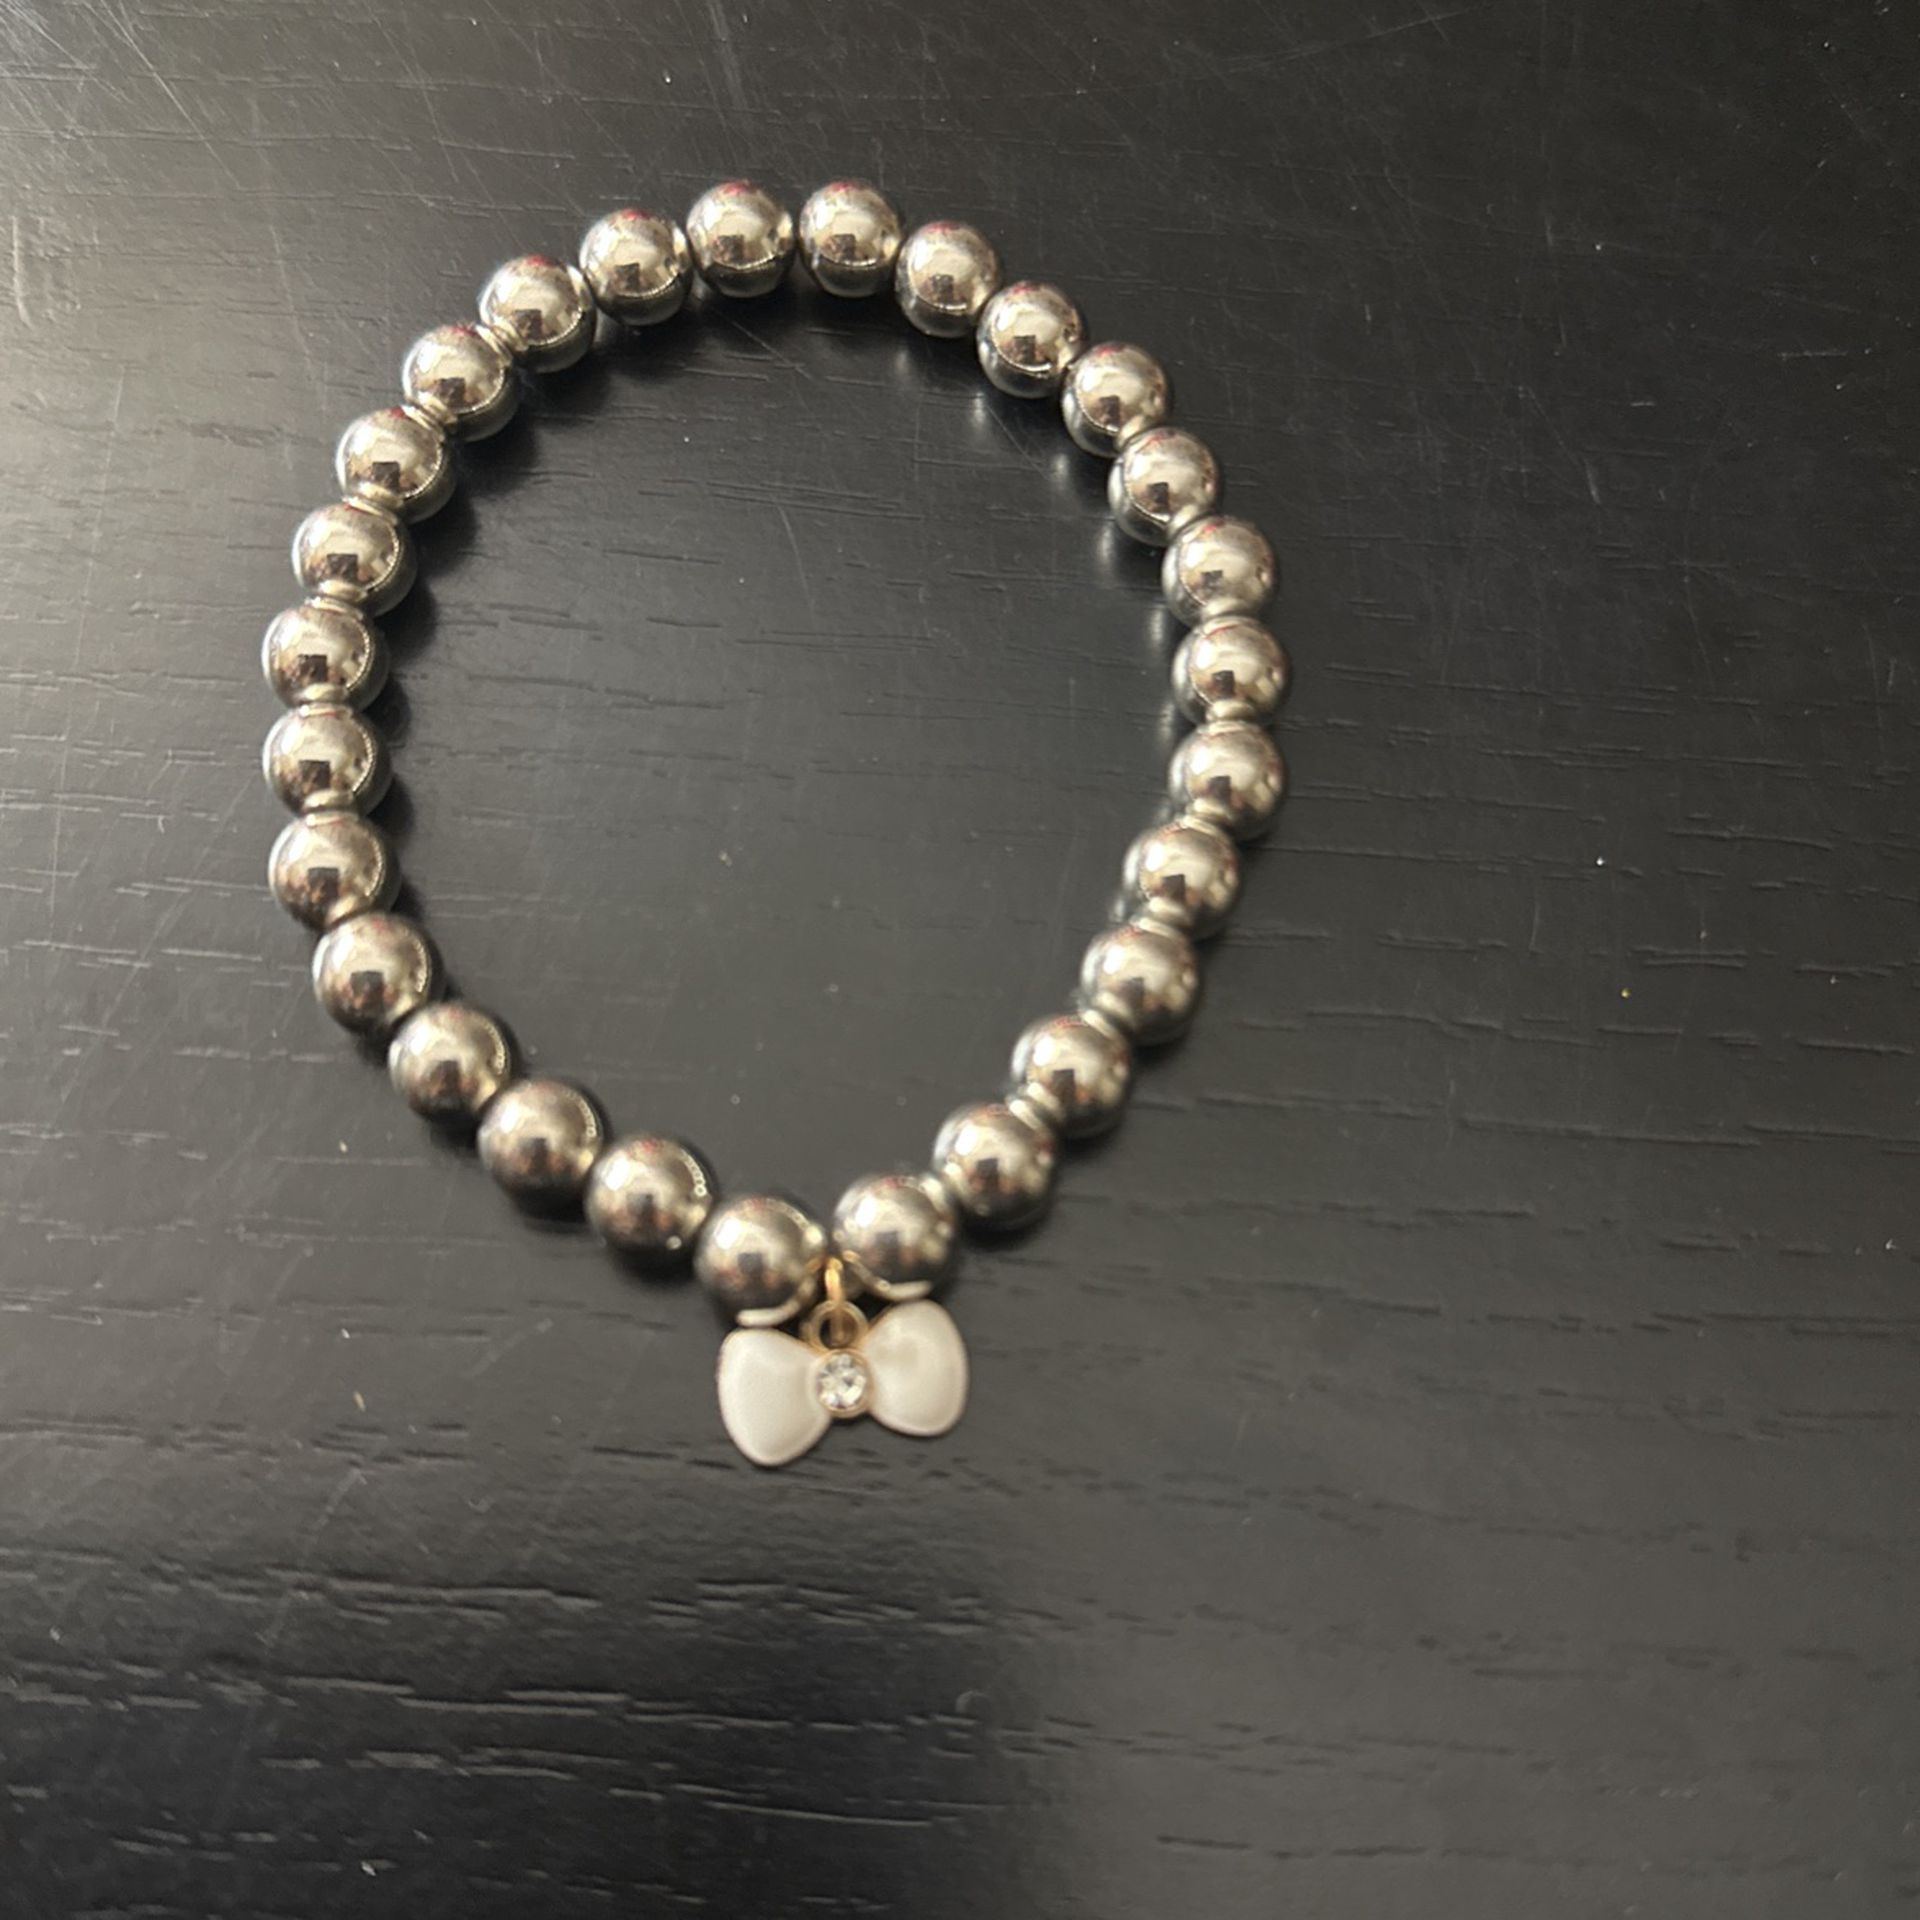 Silver Bead Bracelet With A White Charm